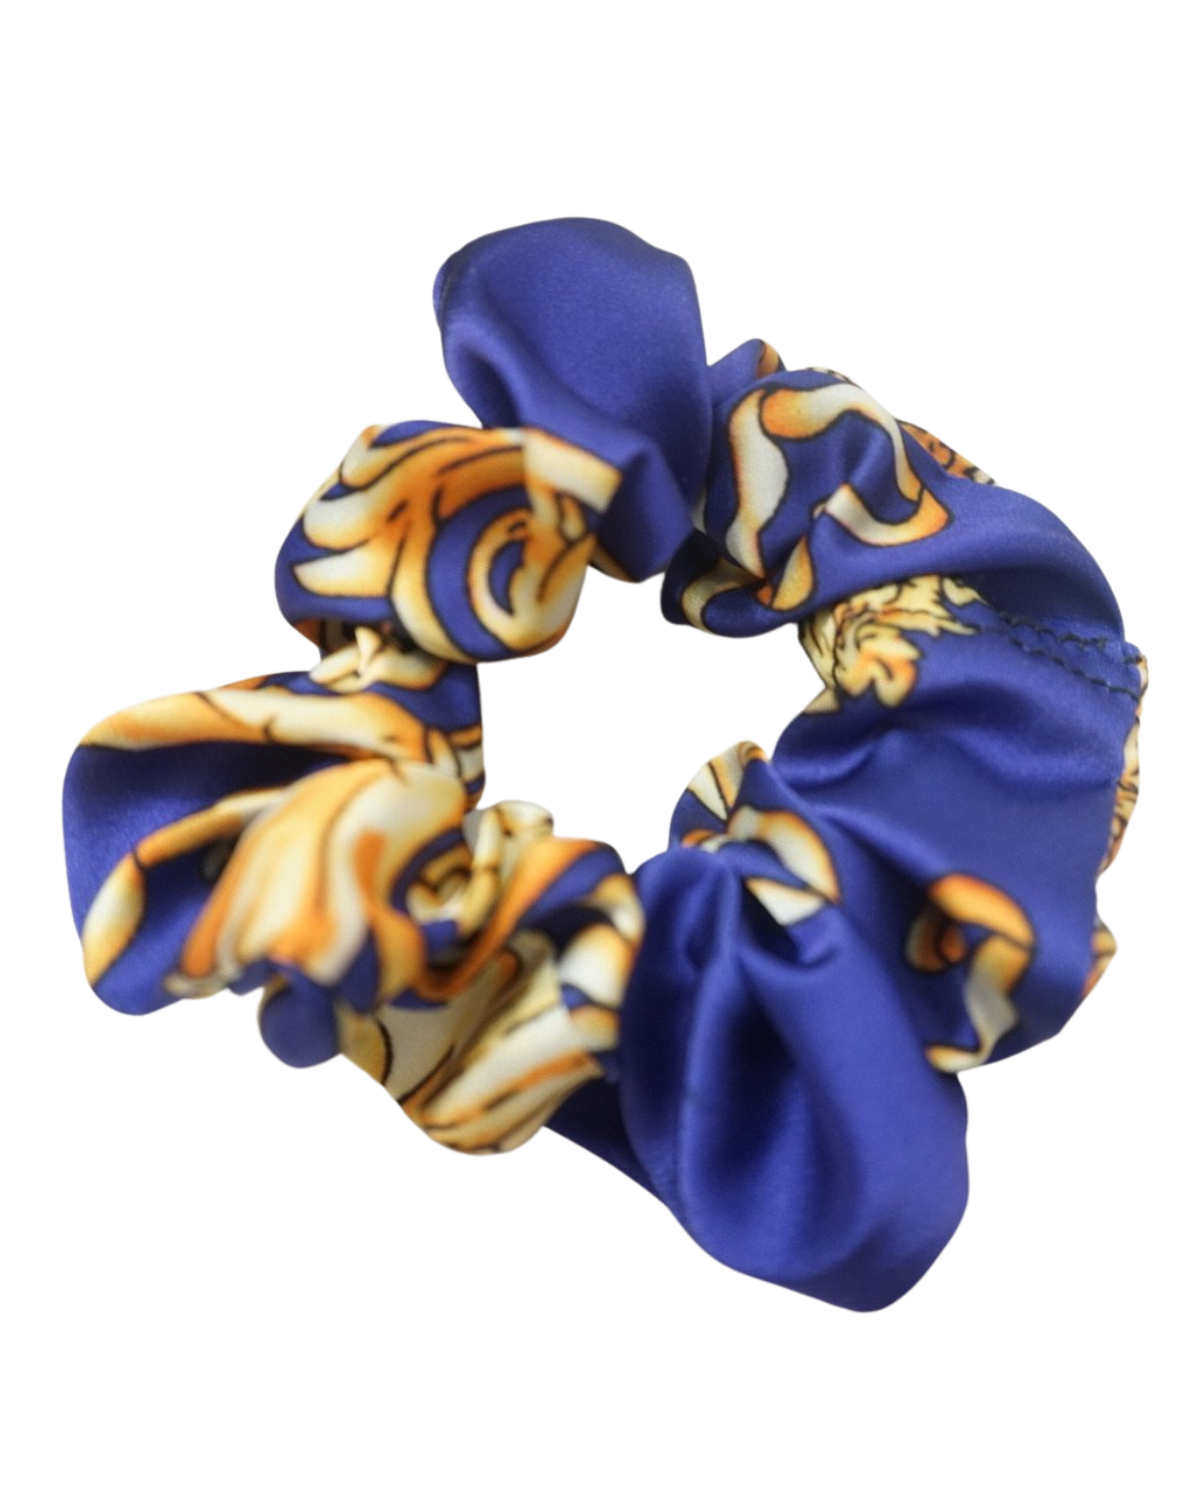 The Sustainable Scrunchie